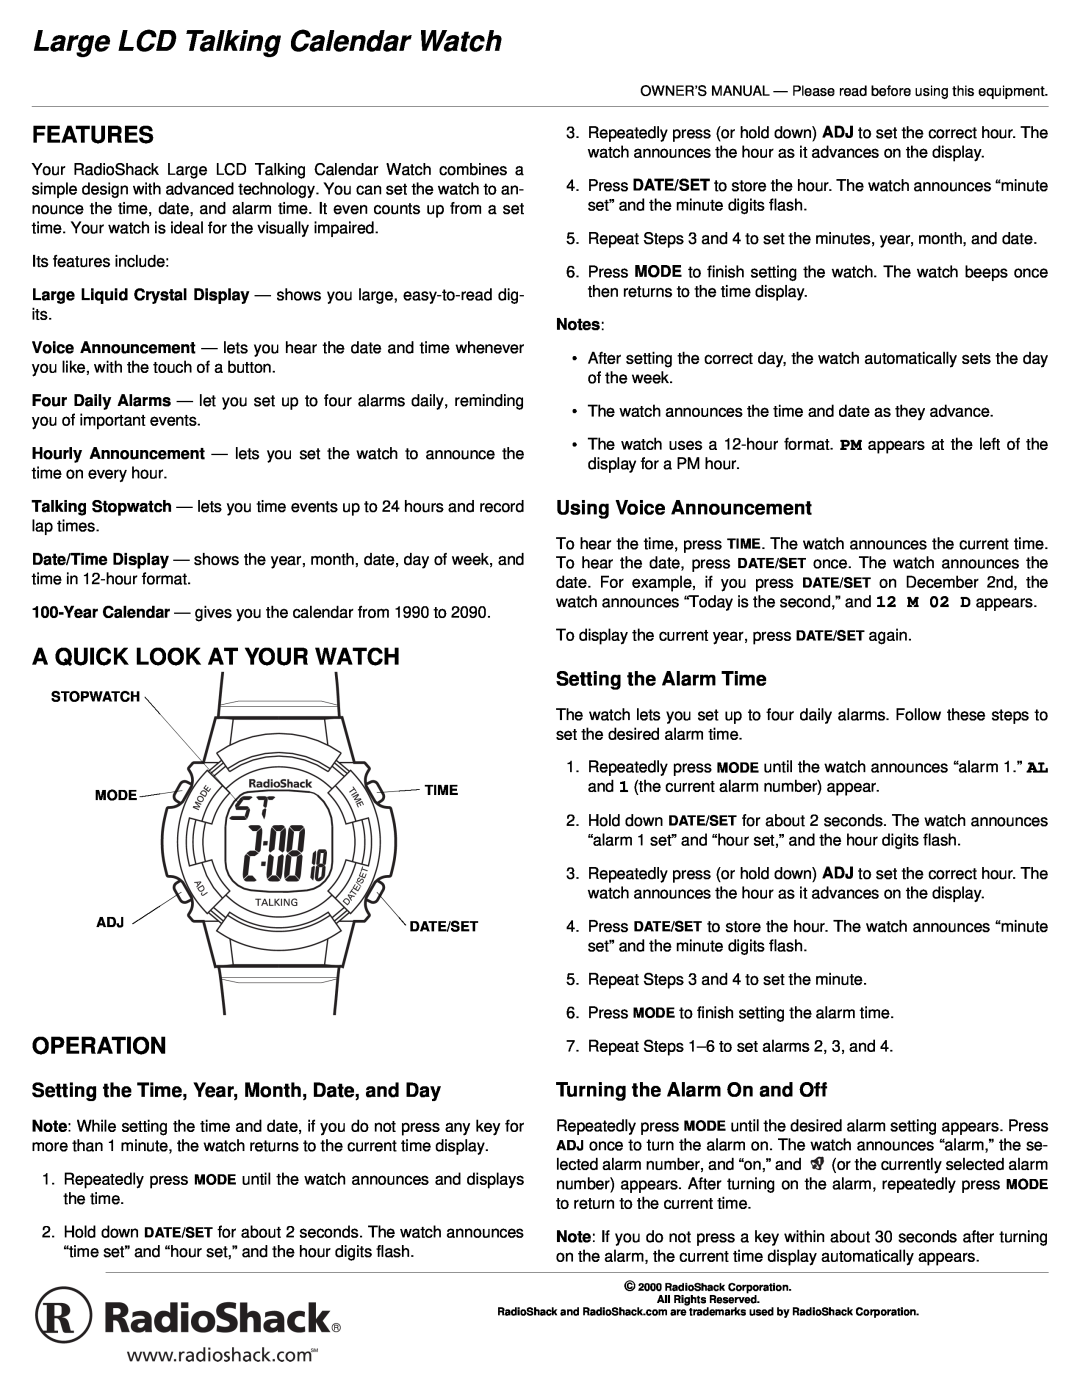 Radio Shack 63-5103 owner manual Features, A Quick Look At Your Watch, Operation, Using Voice Announcement 